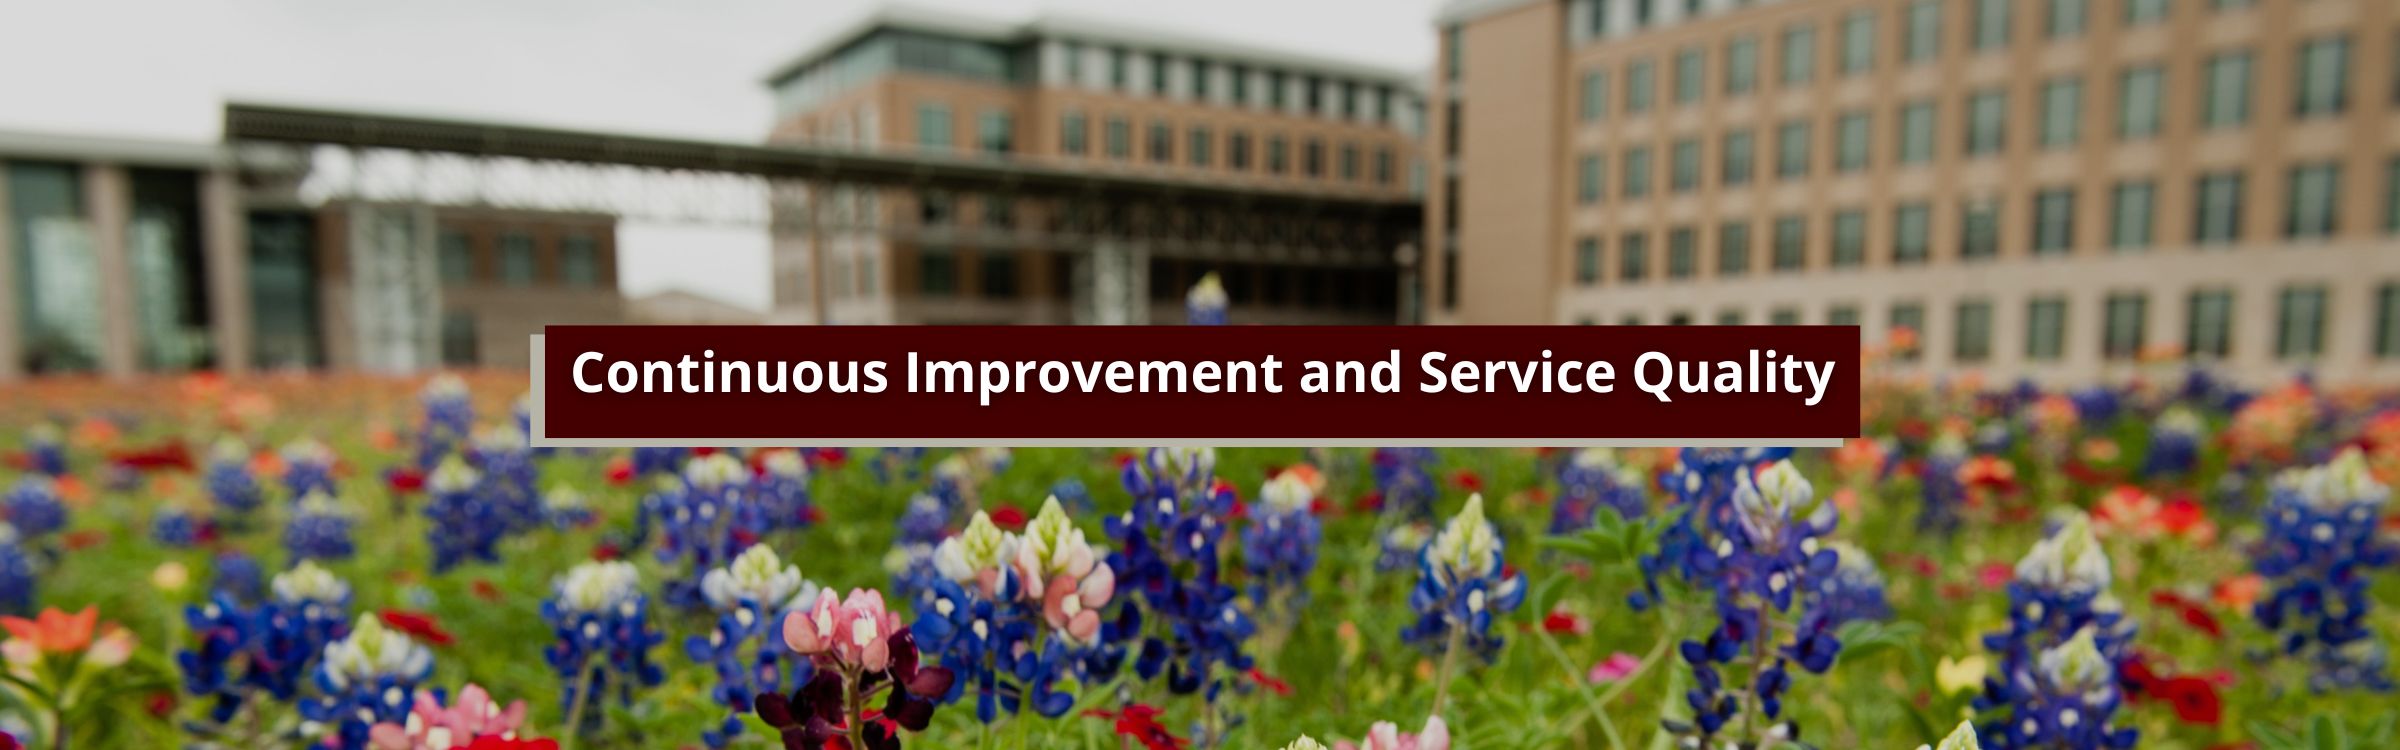 Continuous Improvement and Service Quality